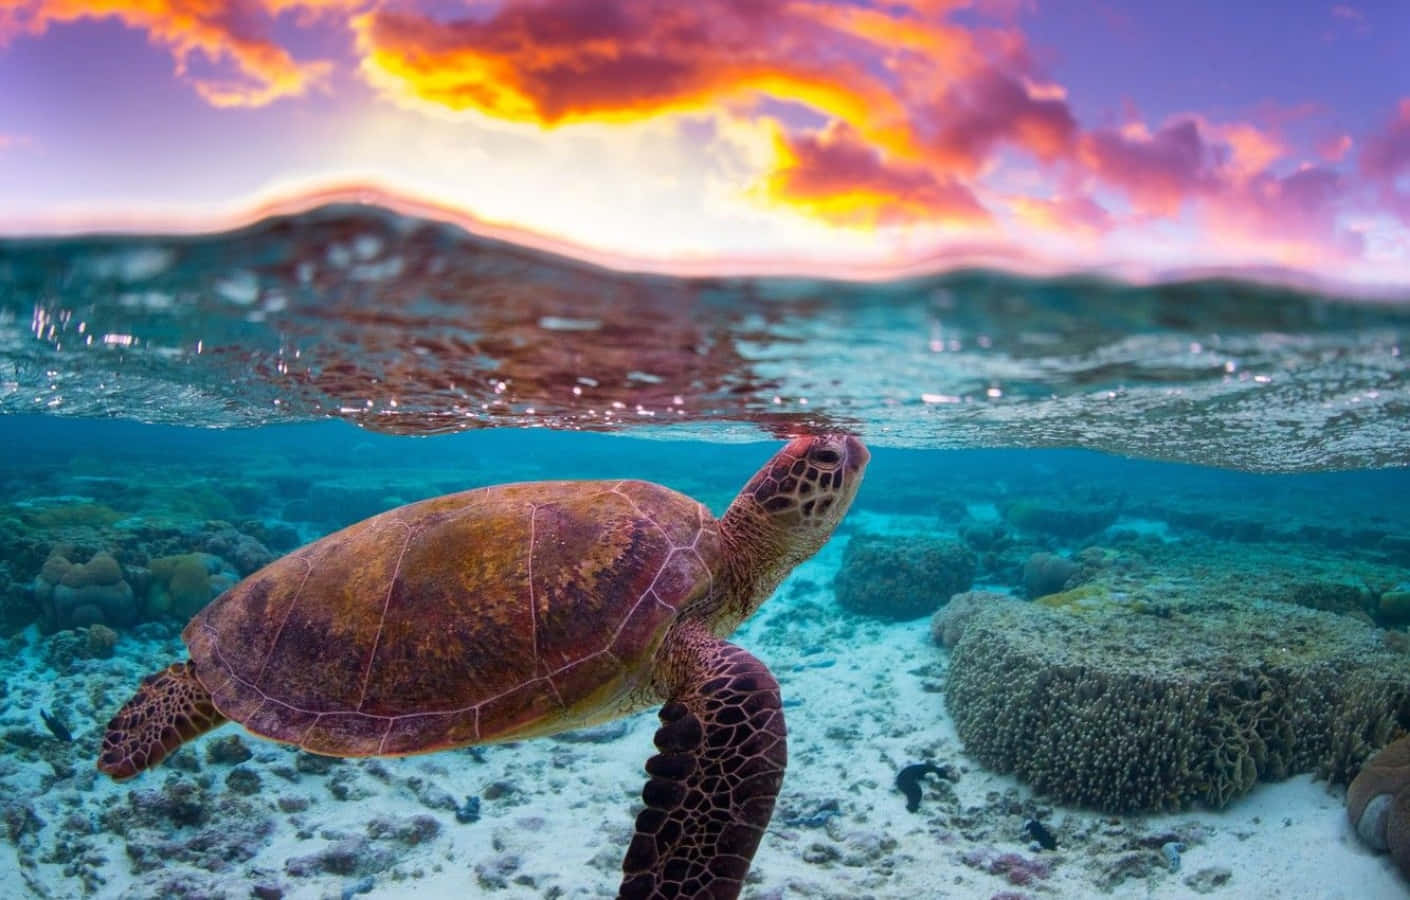 30+ Sea turtle wallpapers HD | Download Free backgrounds